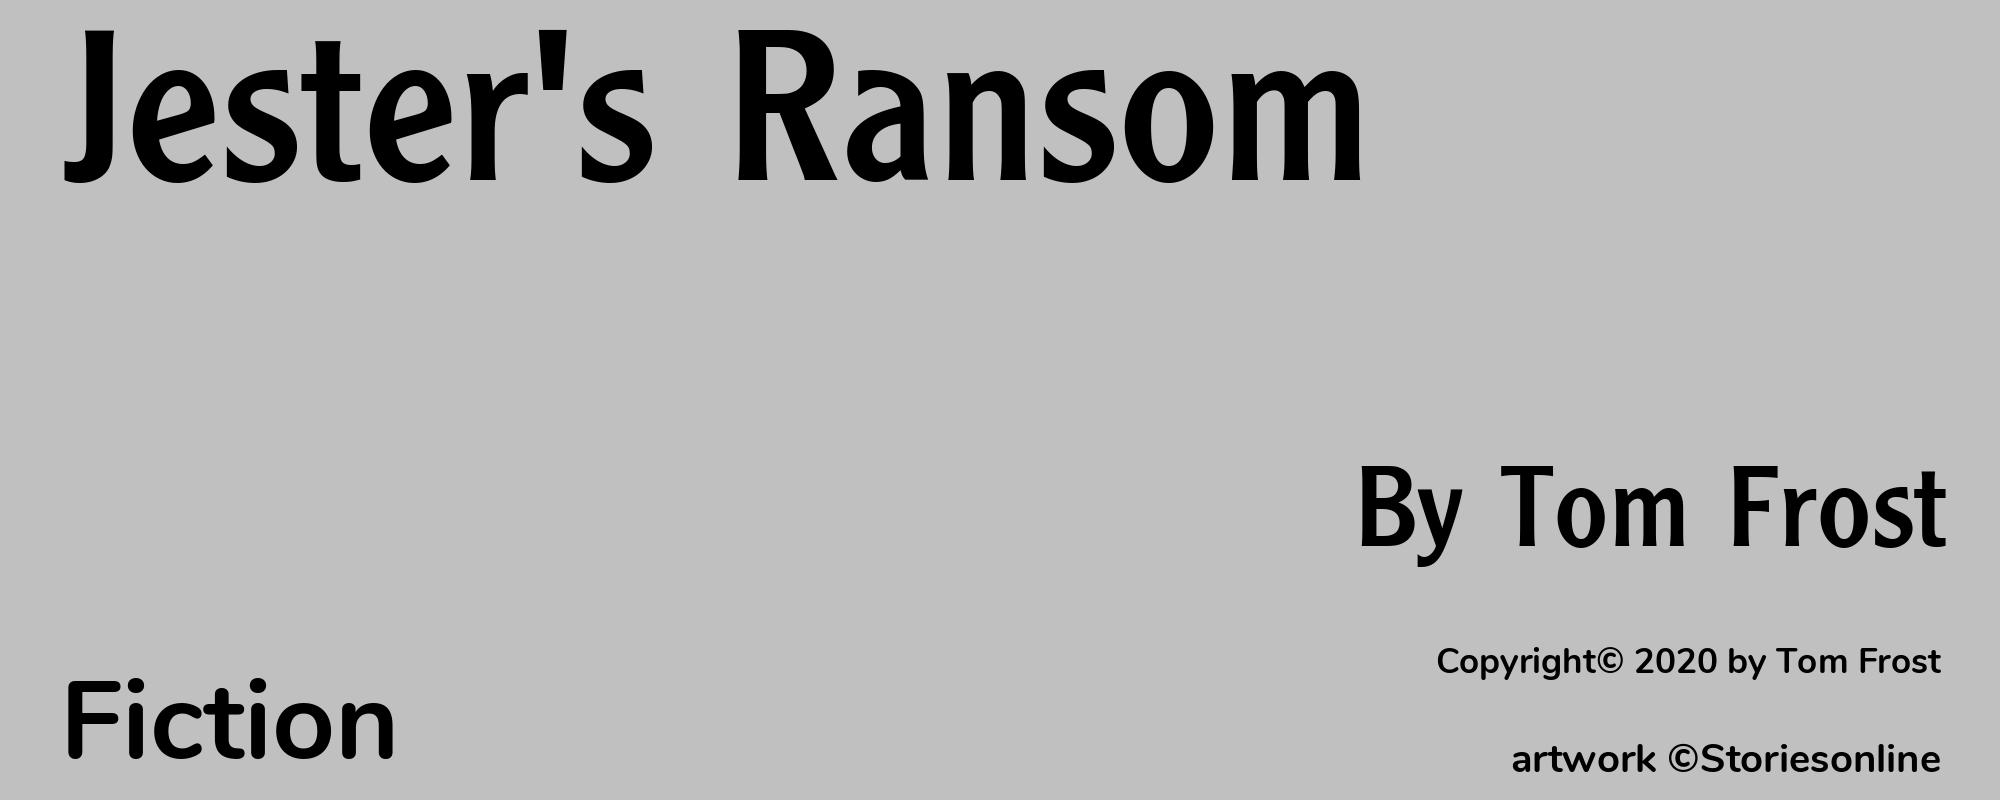 Jester's Ransom - Cover